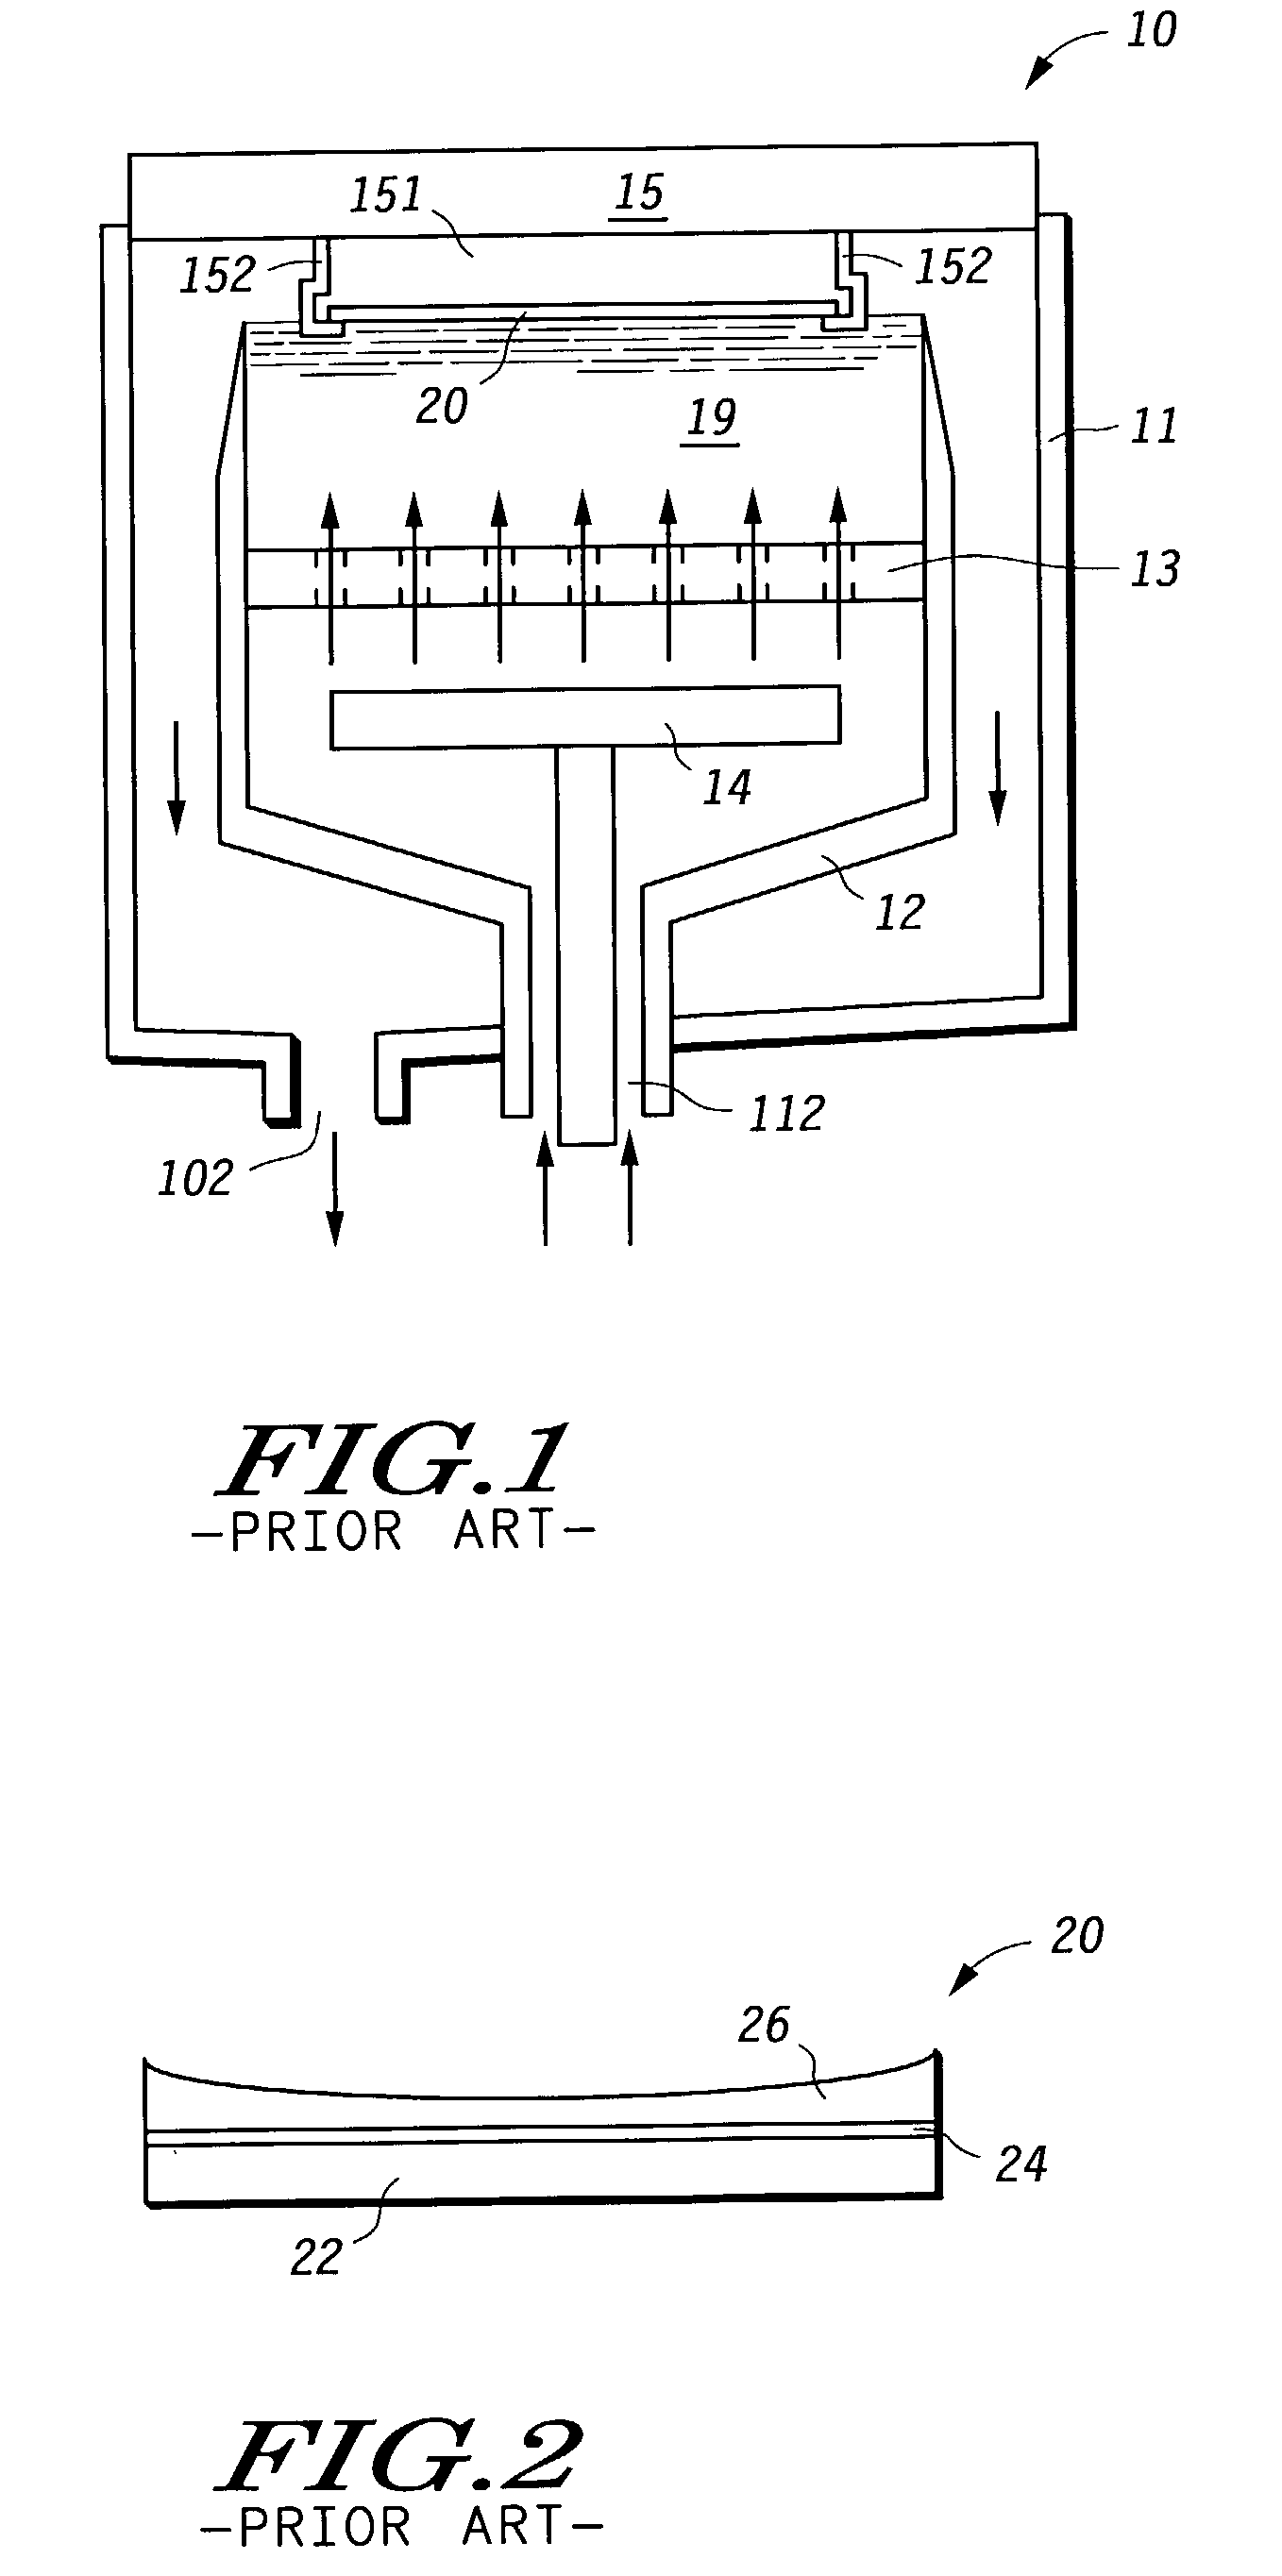 Process for depositing a layer of material on a substrate